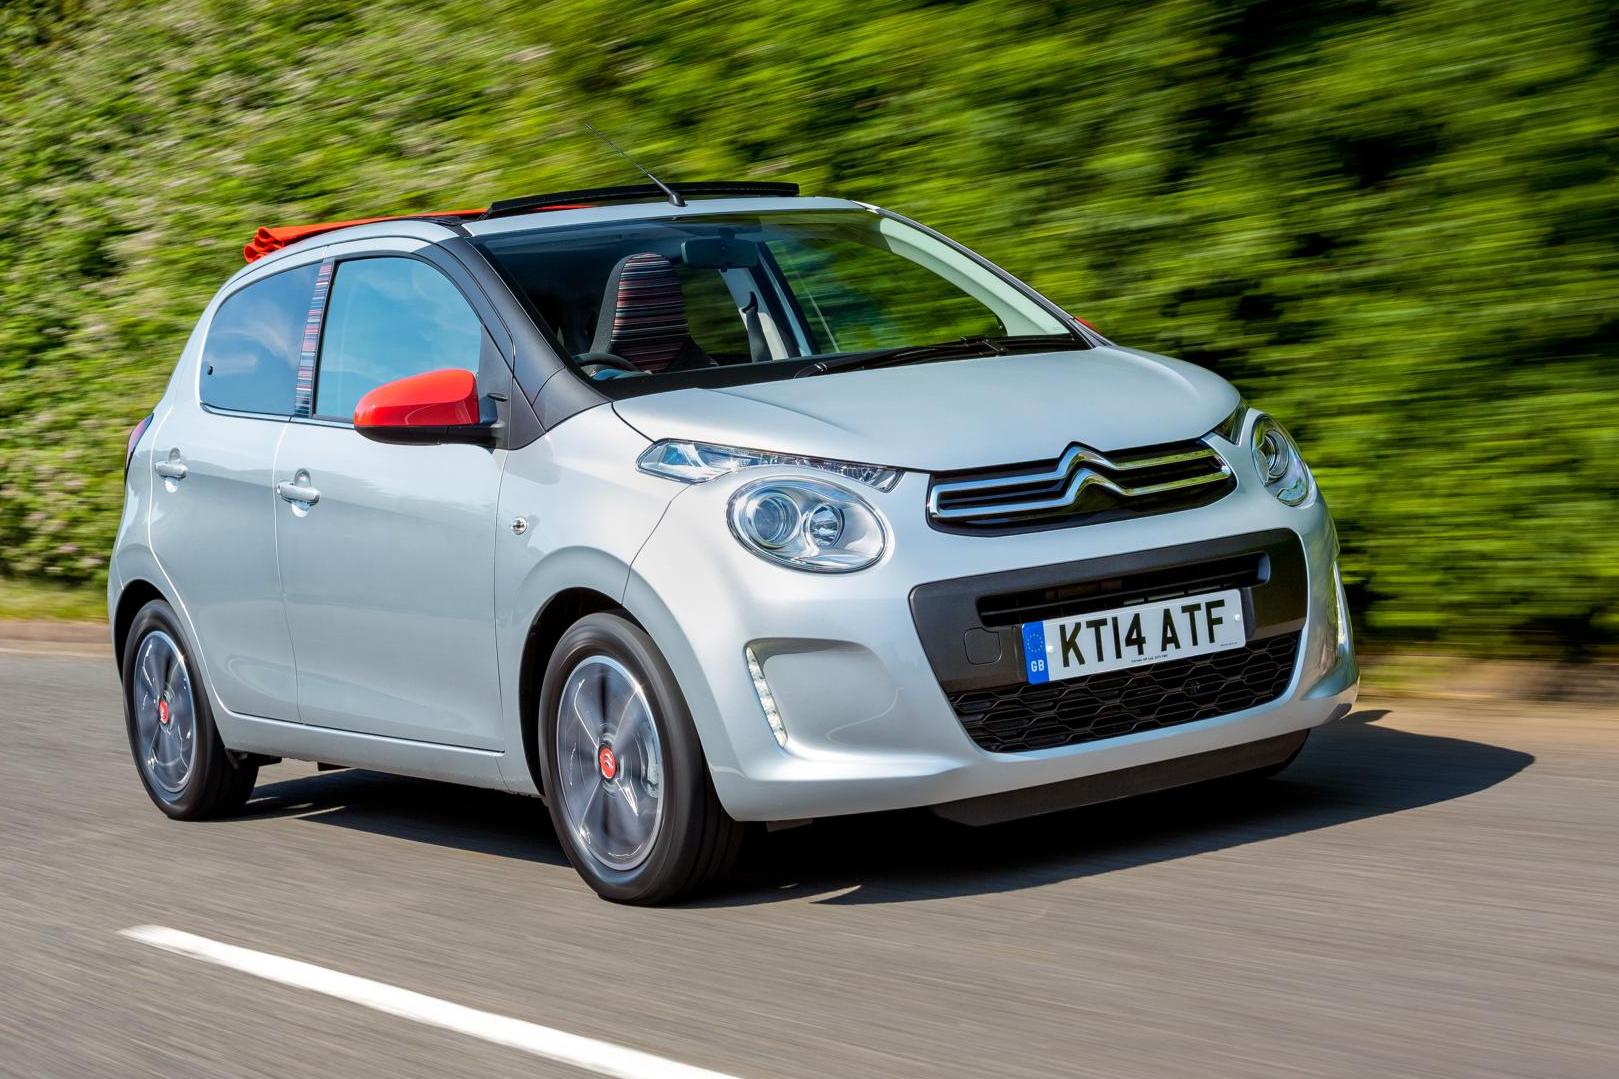 Citroen C1 Images, pictures, gallery